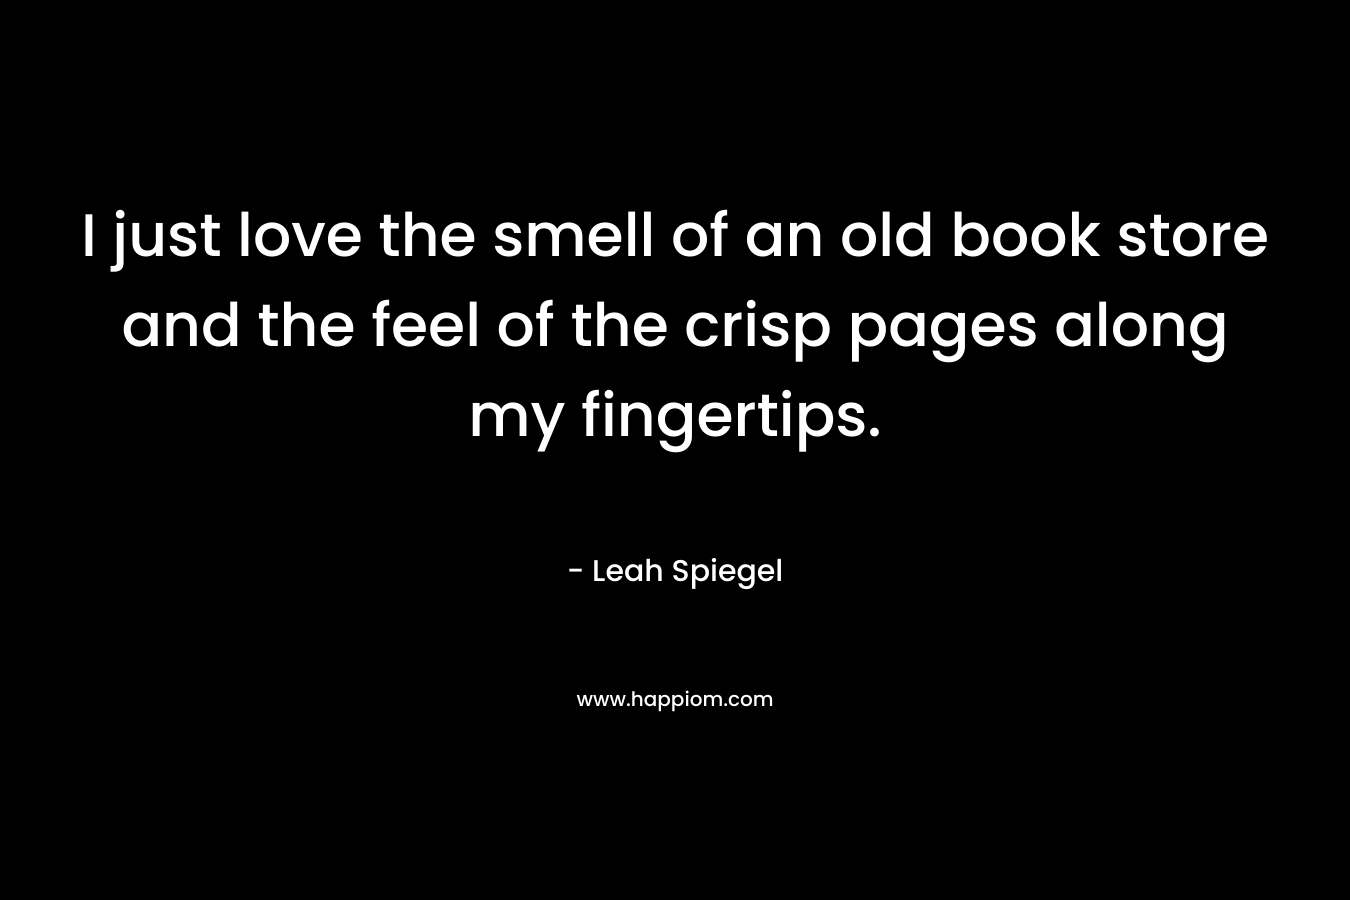 I just love the smell of an old book store and the feel of the crisp pages along my fingertips.